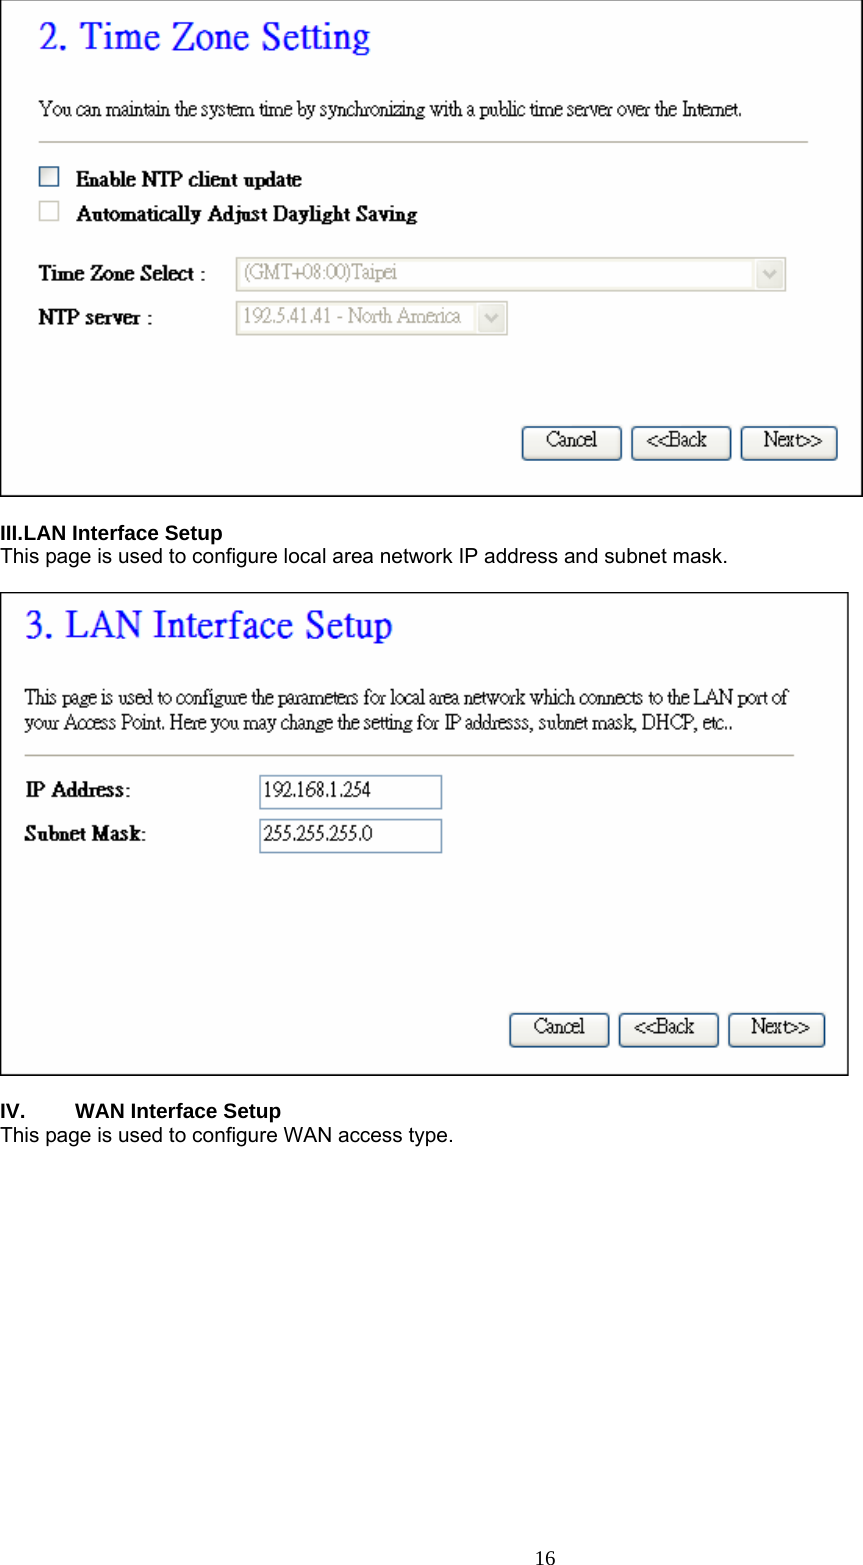   III. LAN Interface Setup This page is used to configure local area network IP address and subnet mask.    IV.  WAN Interface Setup This page is used to configure WAN access type.      16